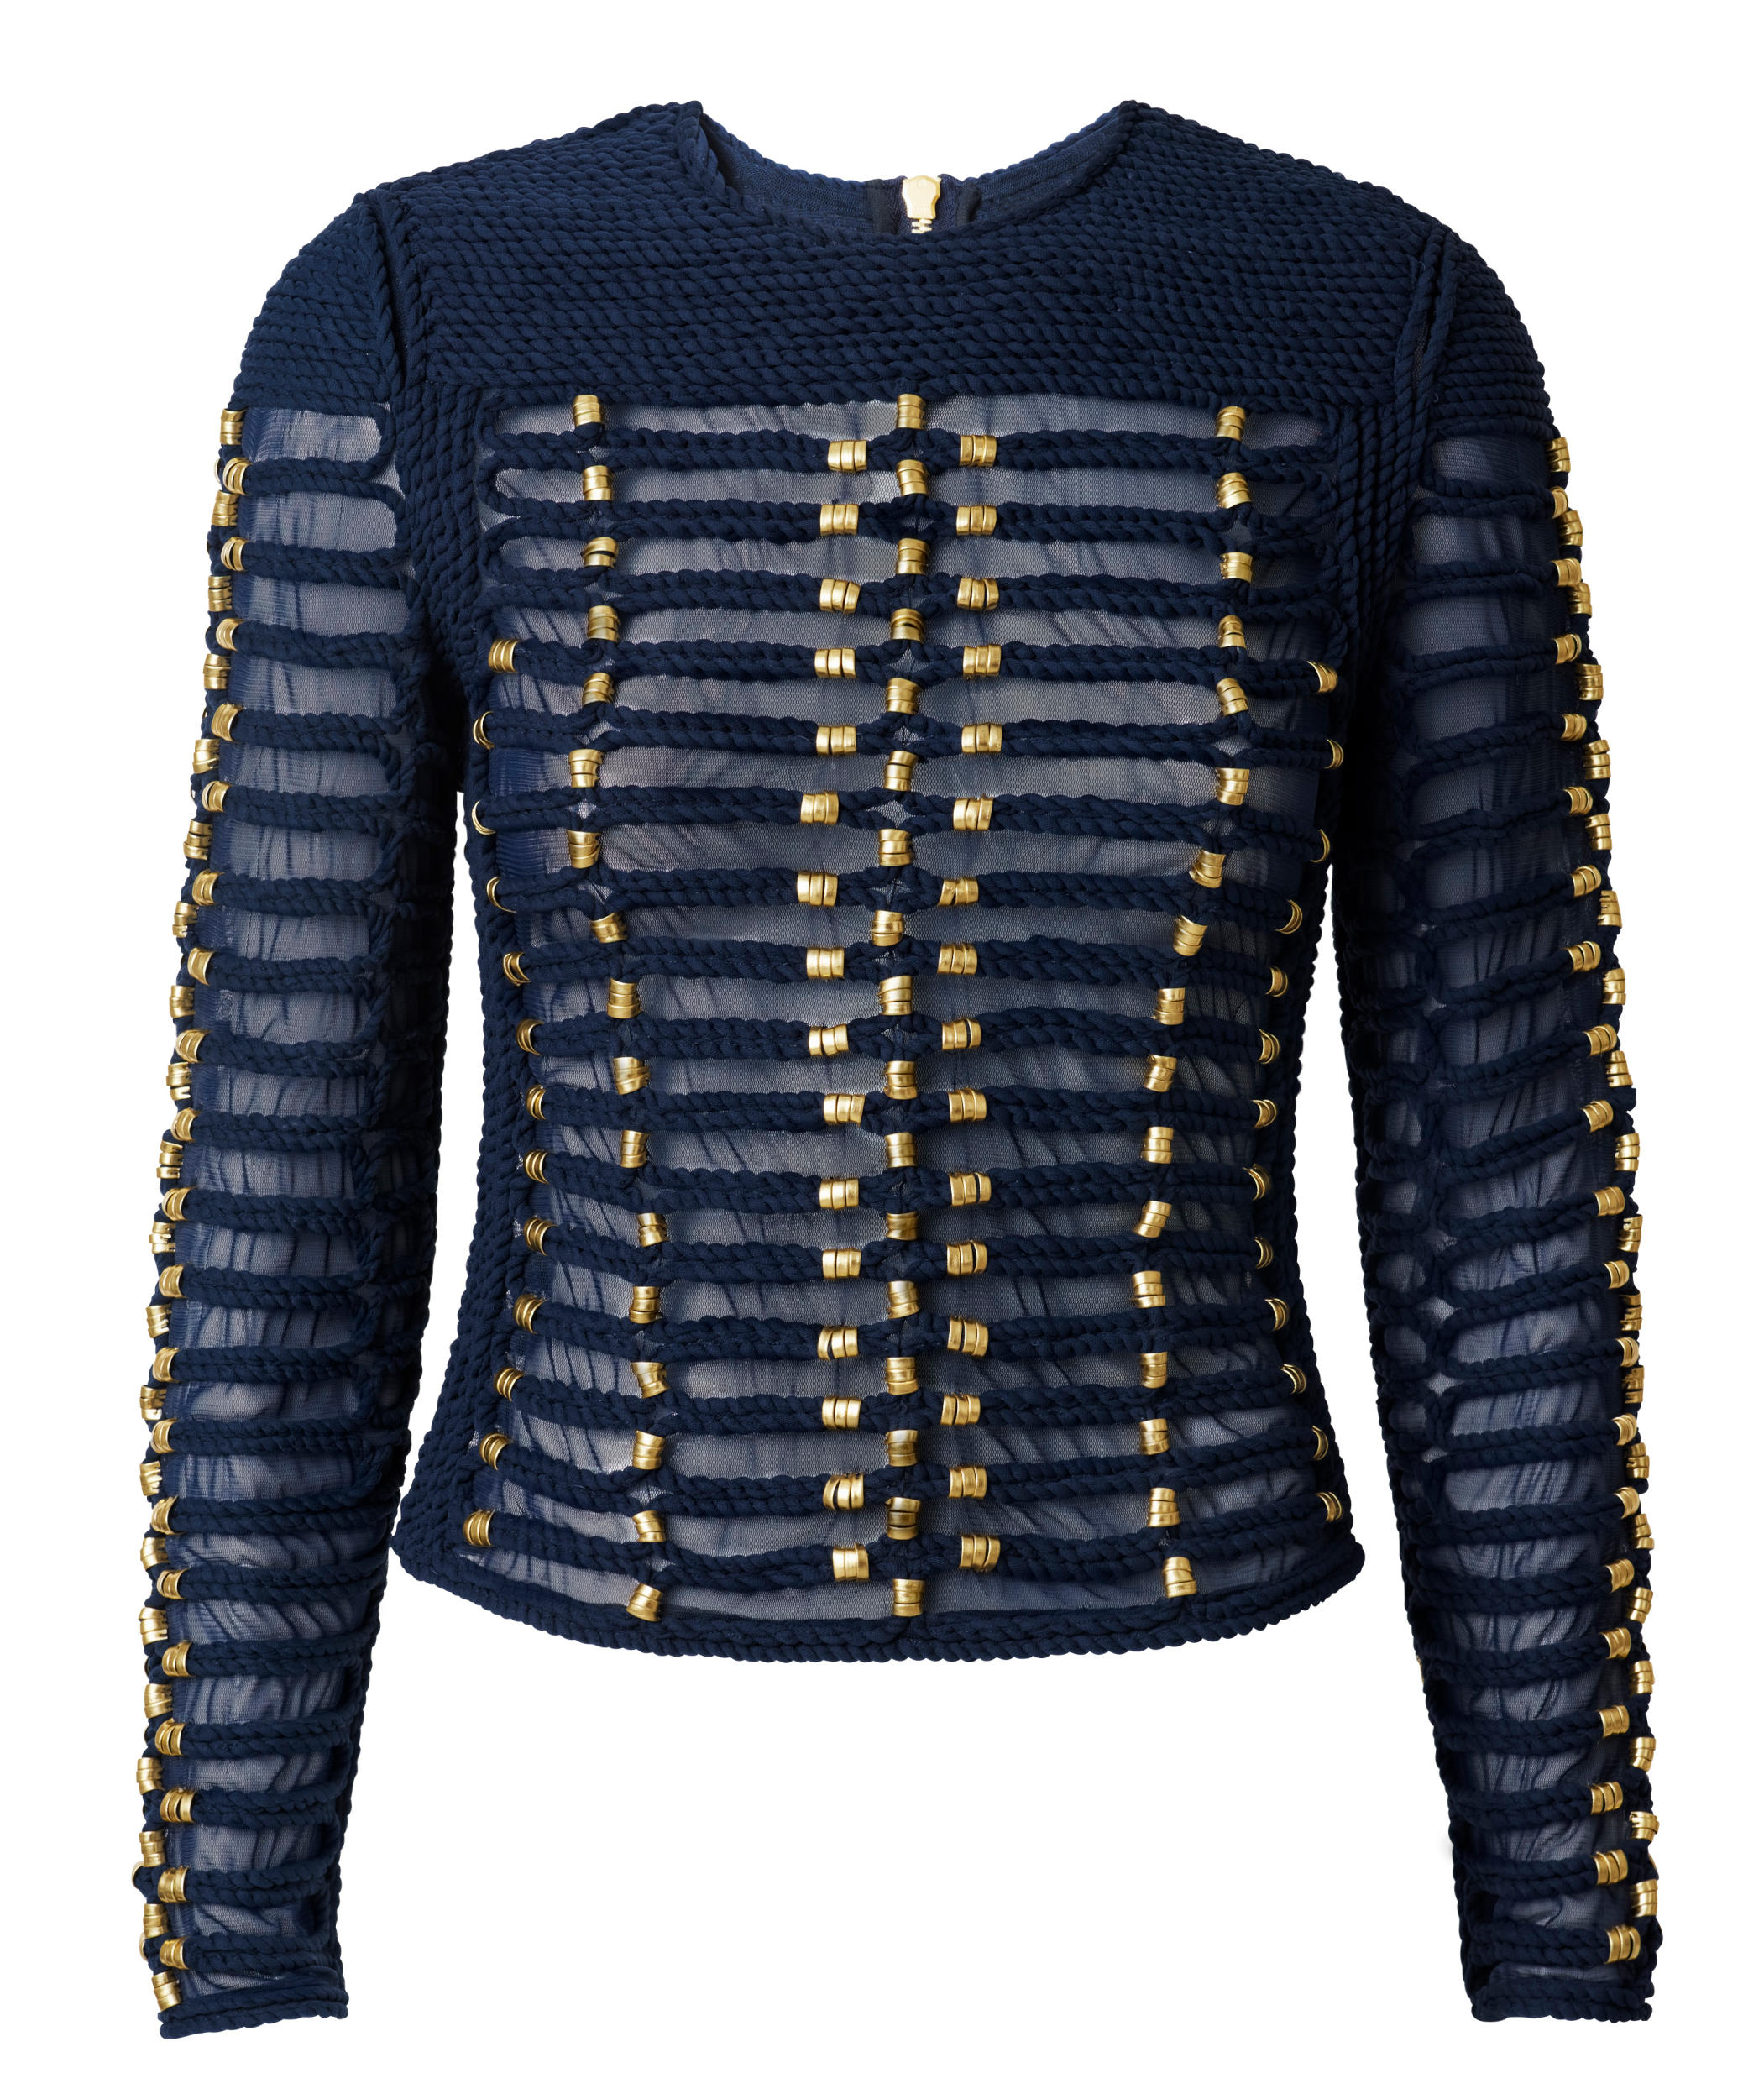 Balmain H&M: The Collection And List Leak